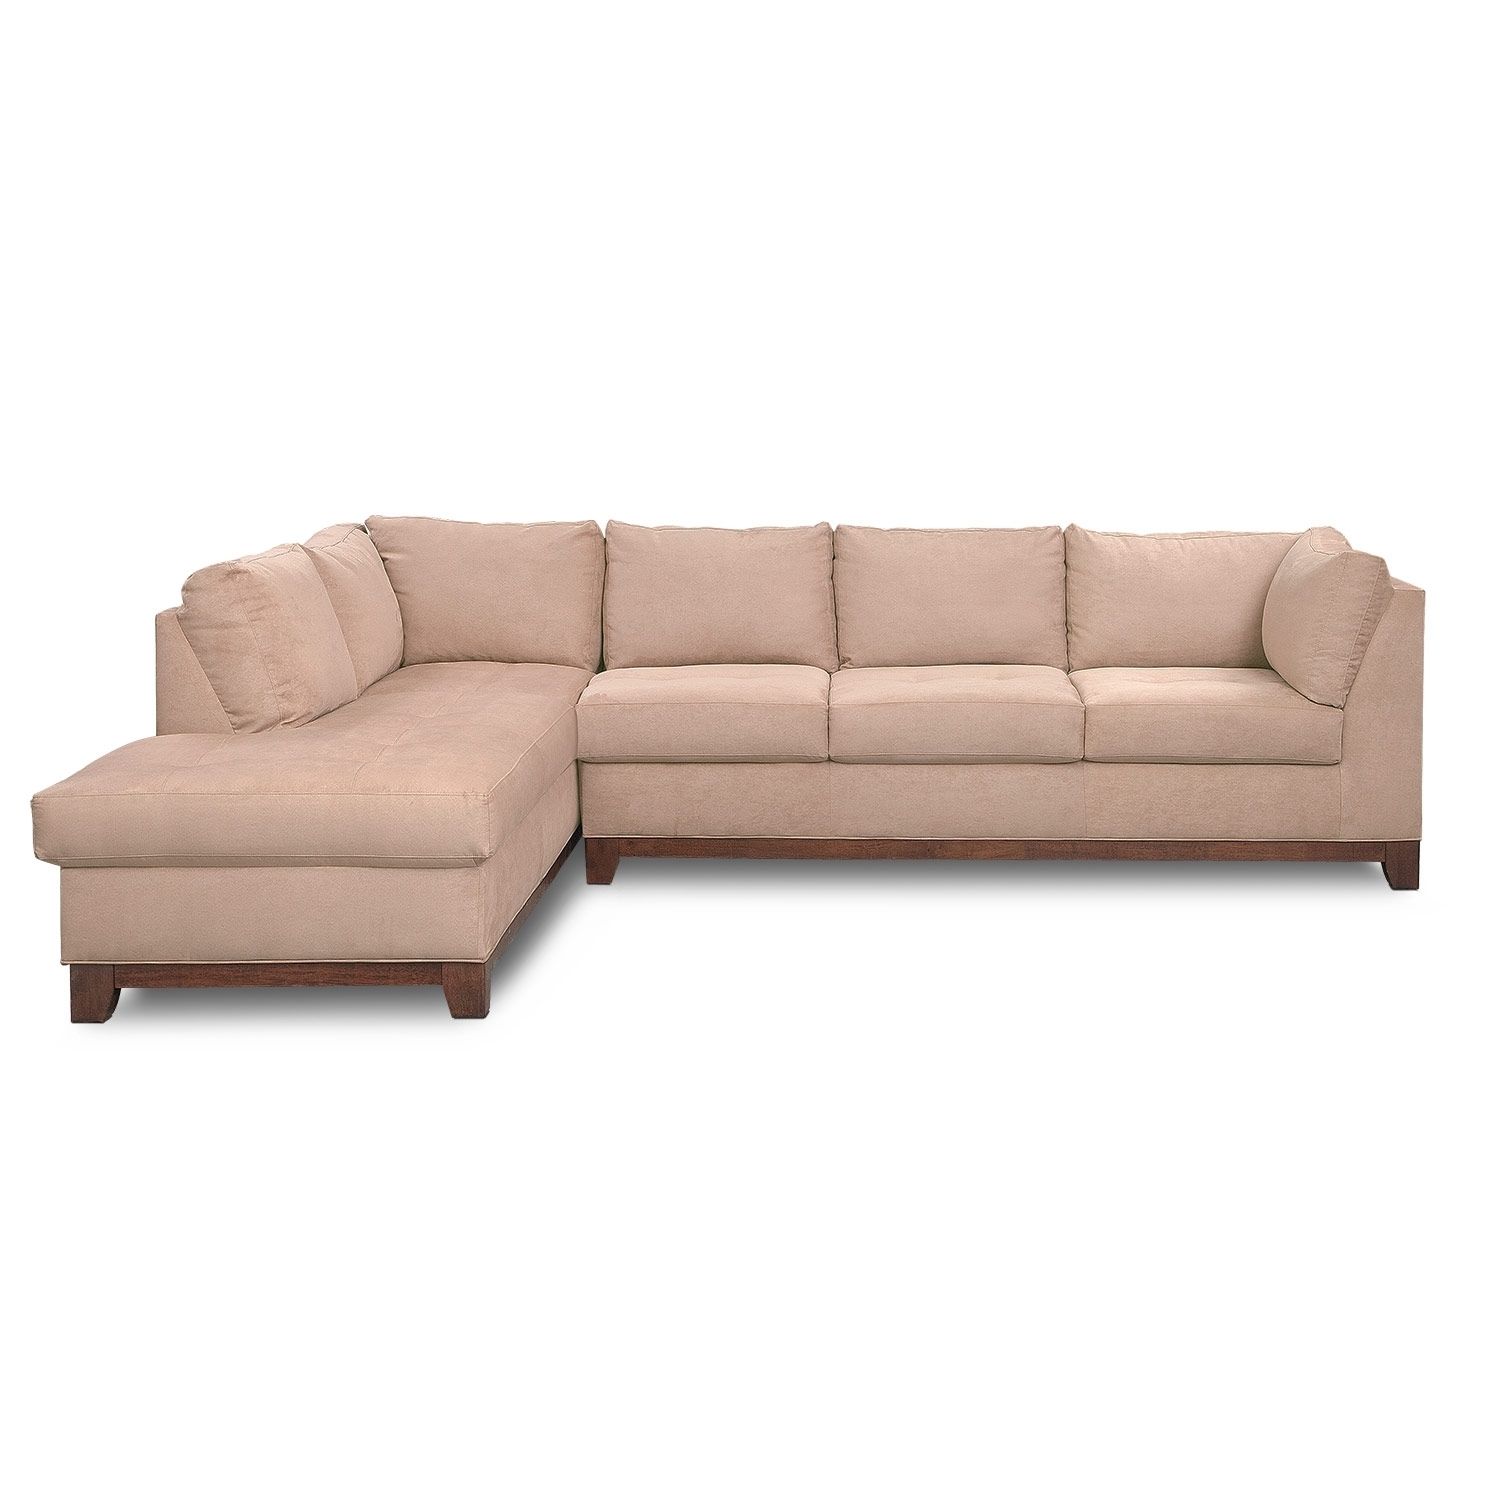 Stunning Value City Sectional Sofa 64 In Living Room Sectional Sofas Intended For Value City Sectional Sofas (View 10 of 10)